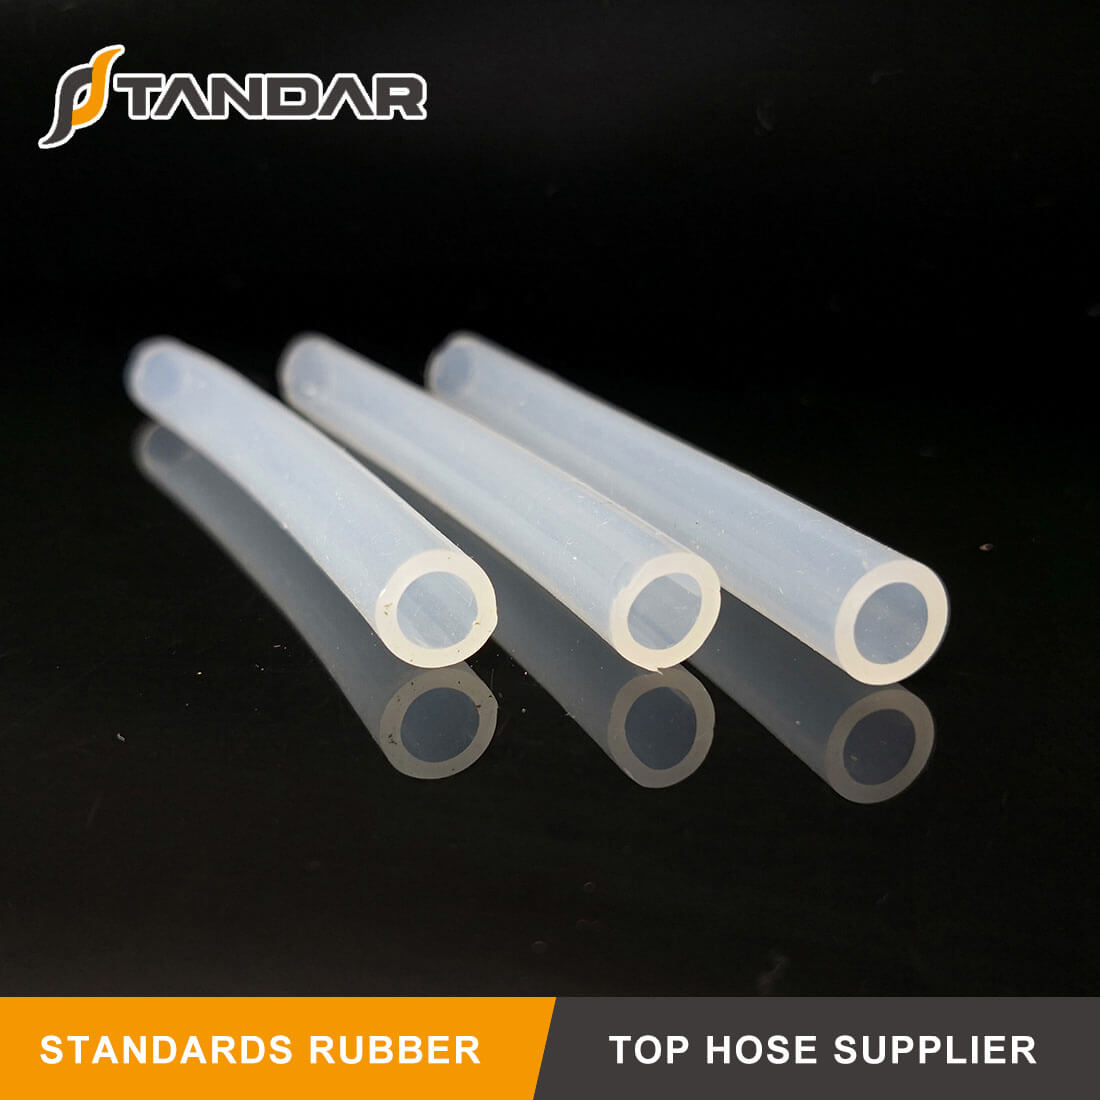 Flexible Transparent FDA Food Grade Silicone Hose For Food Industry